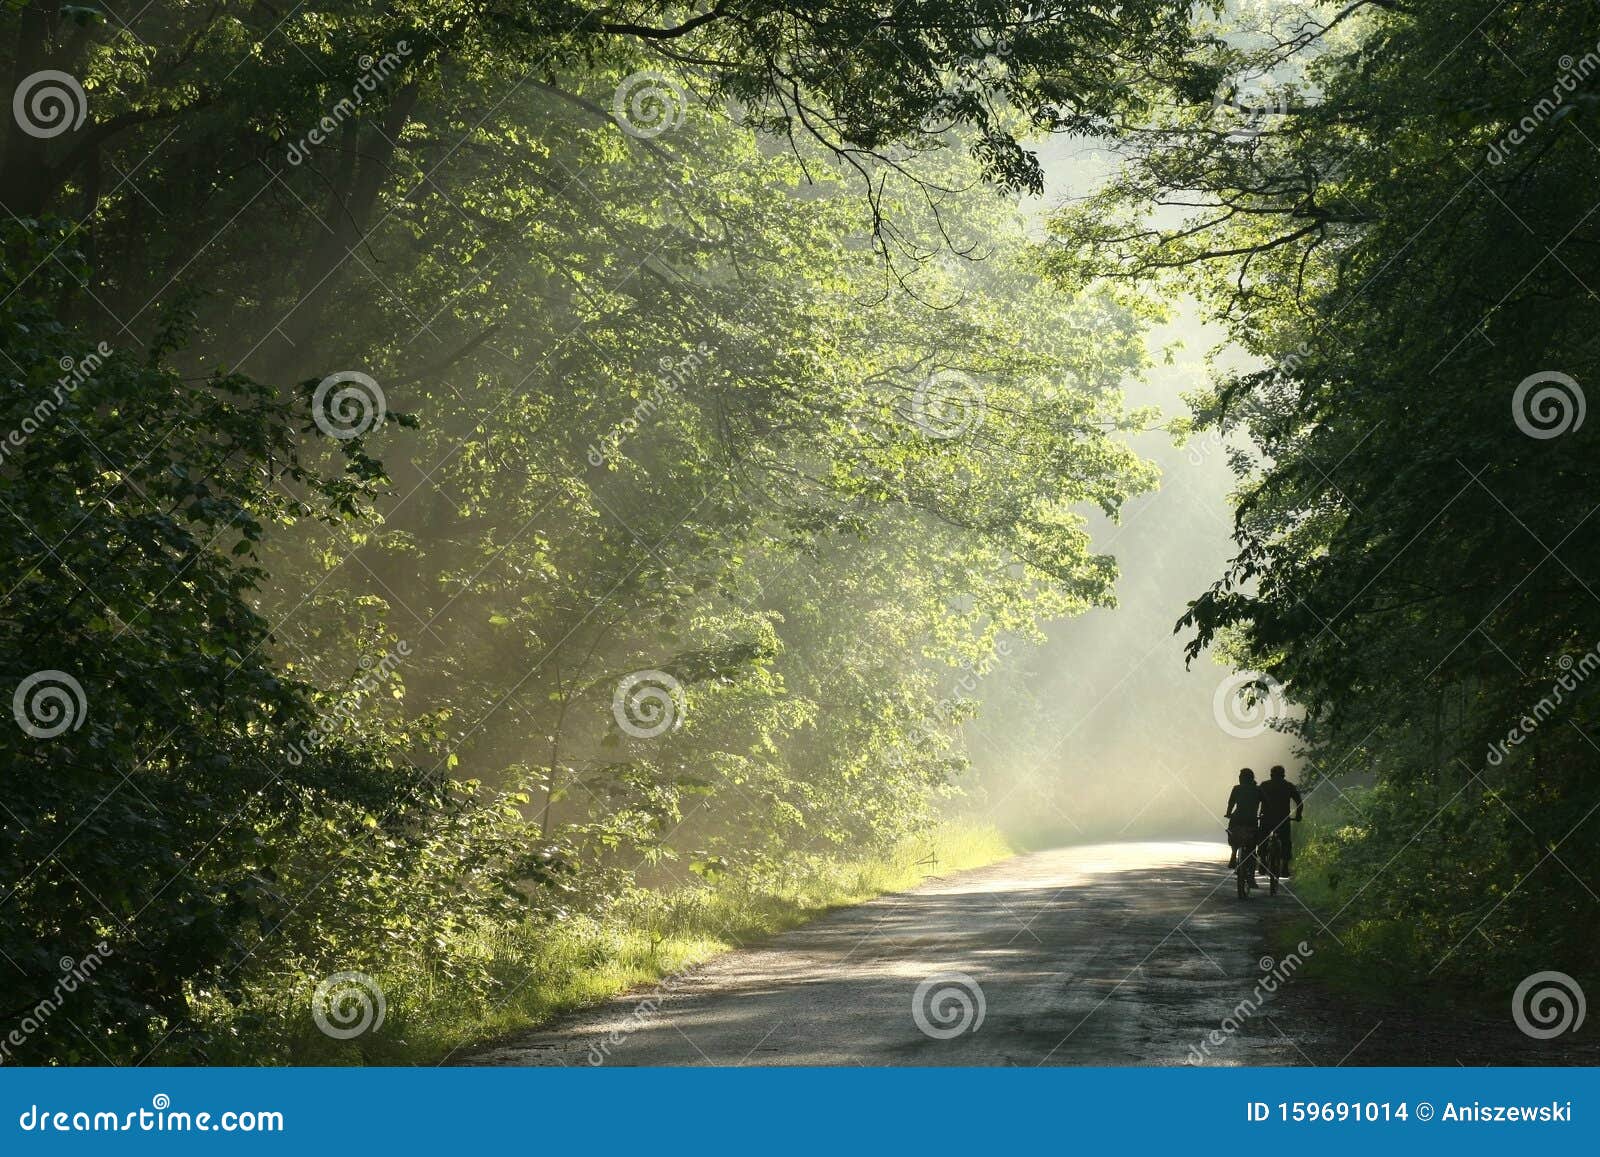 cyclists ride a country road through the spring forest at dusk after rainfall setting sun illuminates oak leaves on branches of